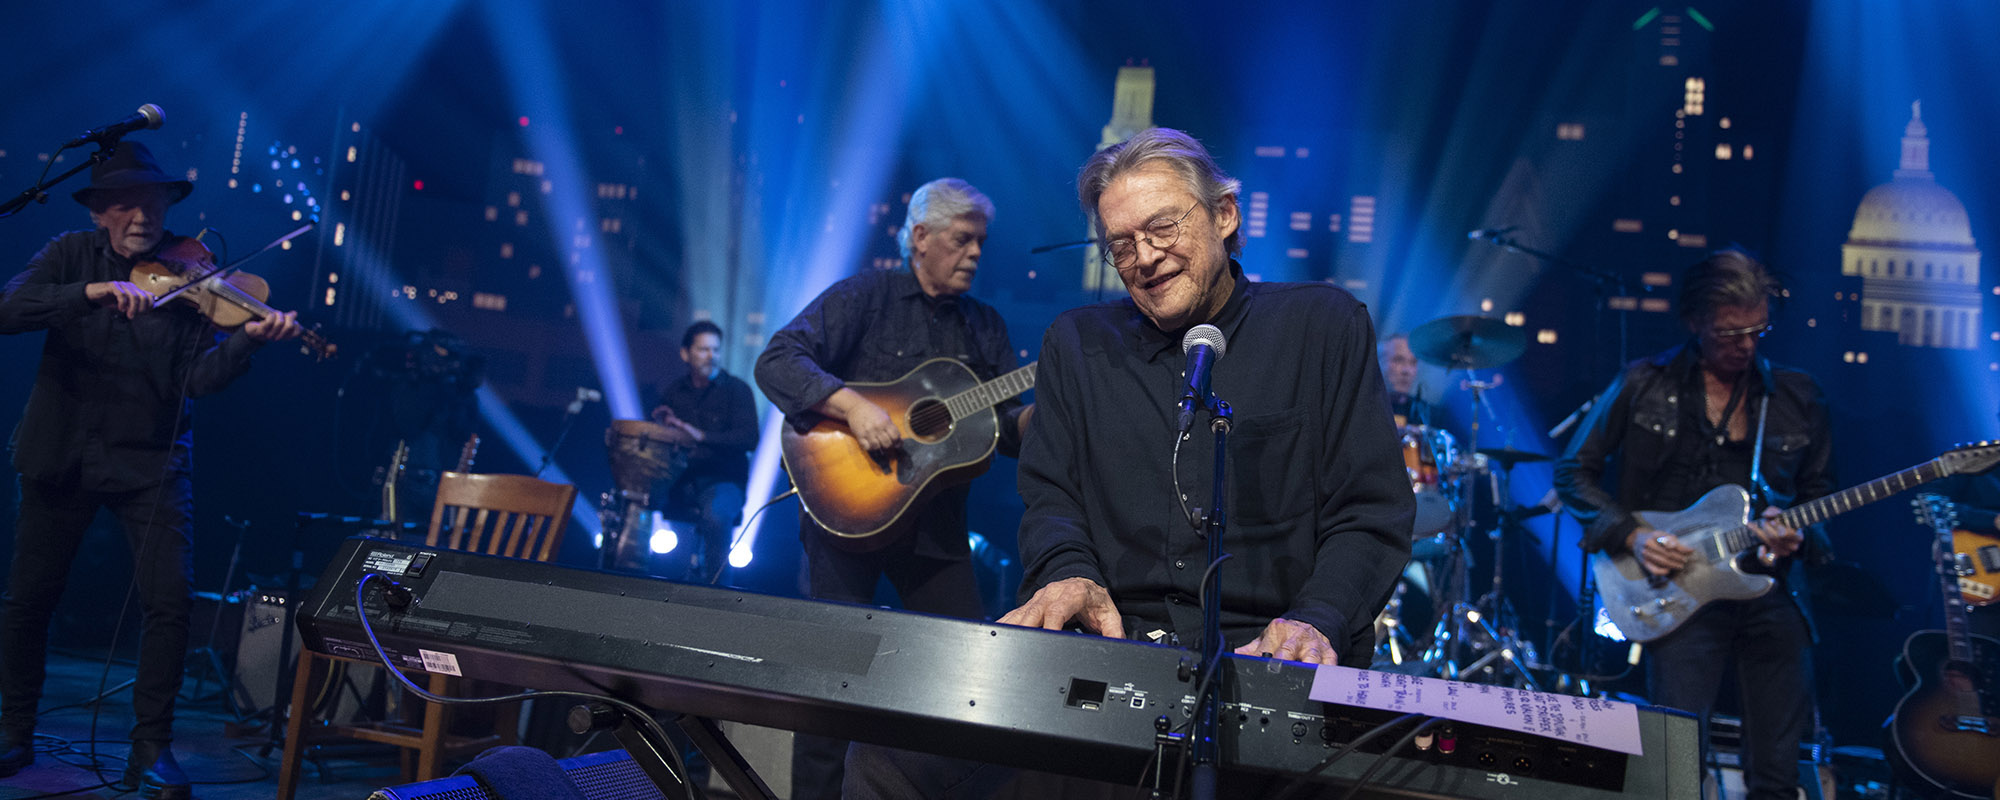 Preview Of Austin City Limits: Spotlighting Songwriting Maverick Terry Allen